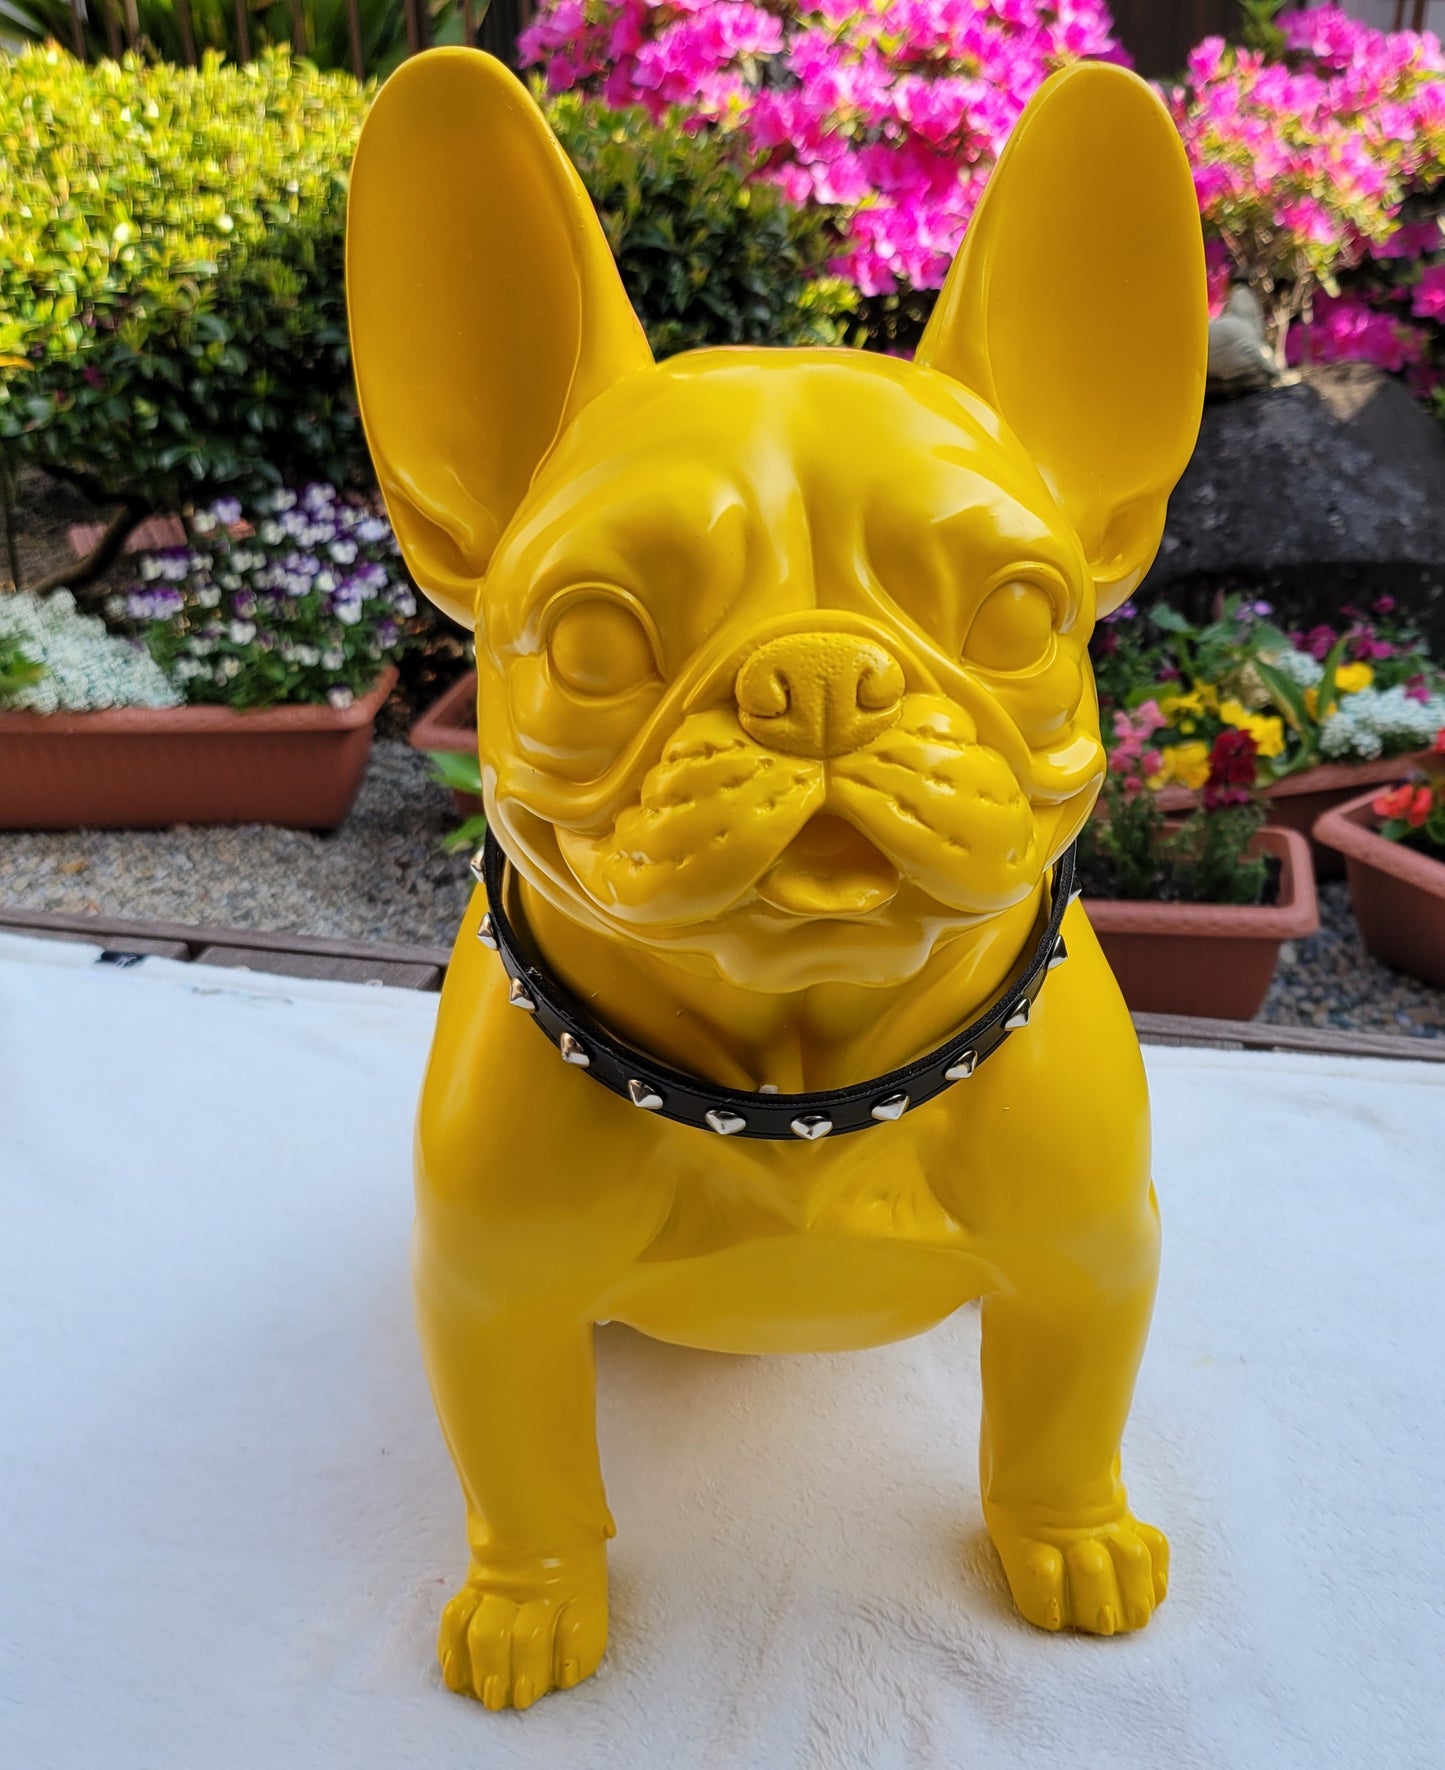 Colorful French Bulldog Free shipping only now!